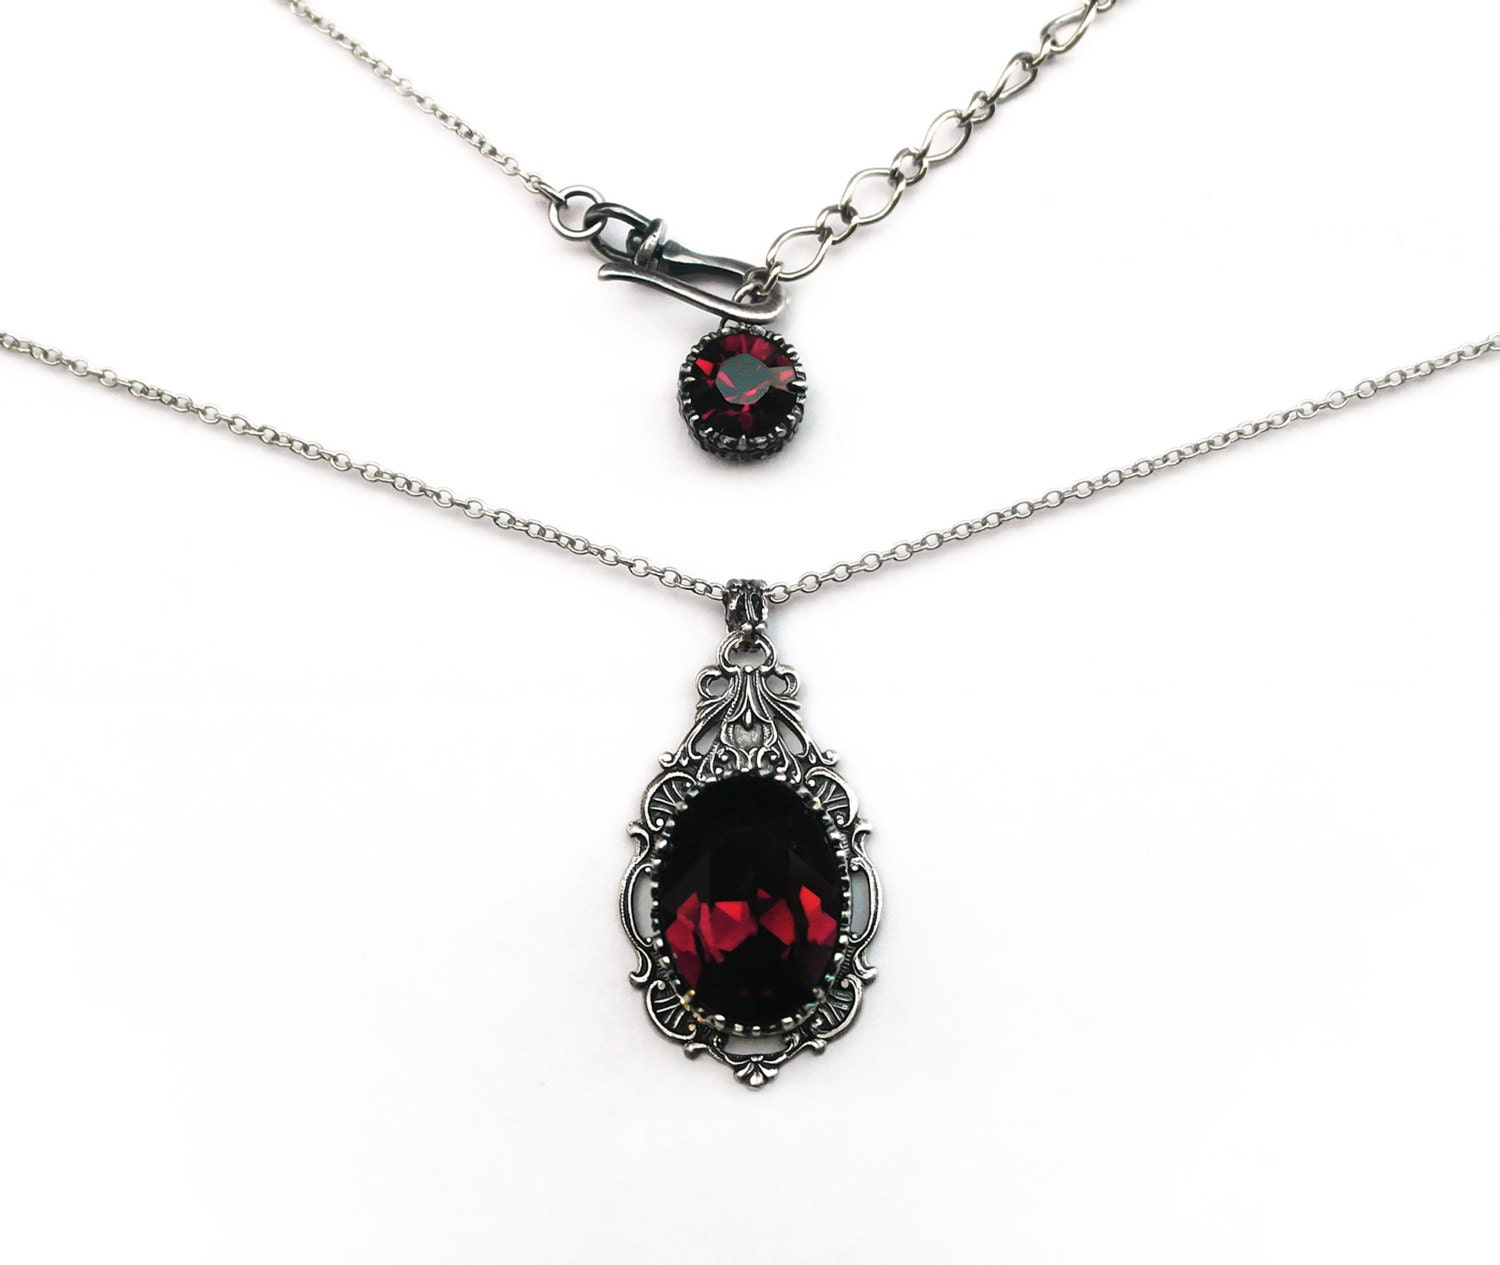 Burgundy Necklace Gothic Jewelry victorian Gothic Necklace